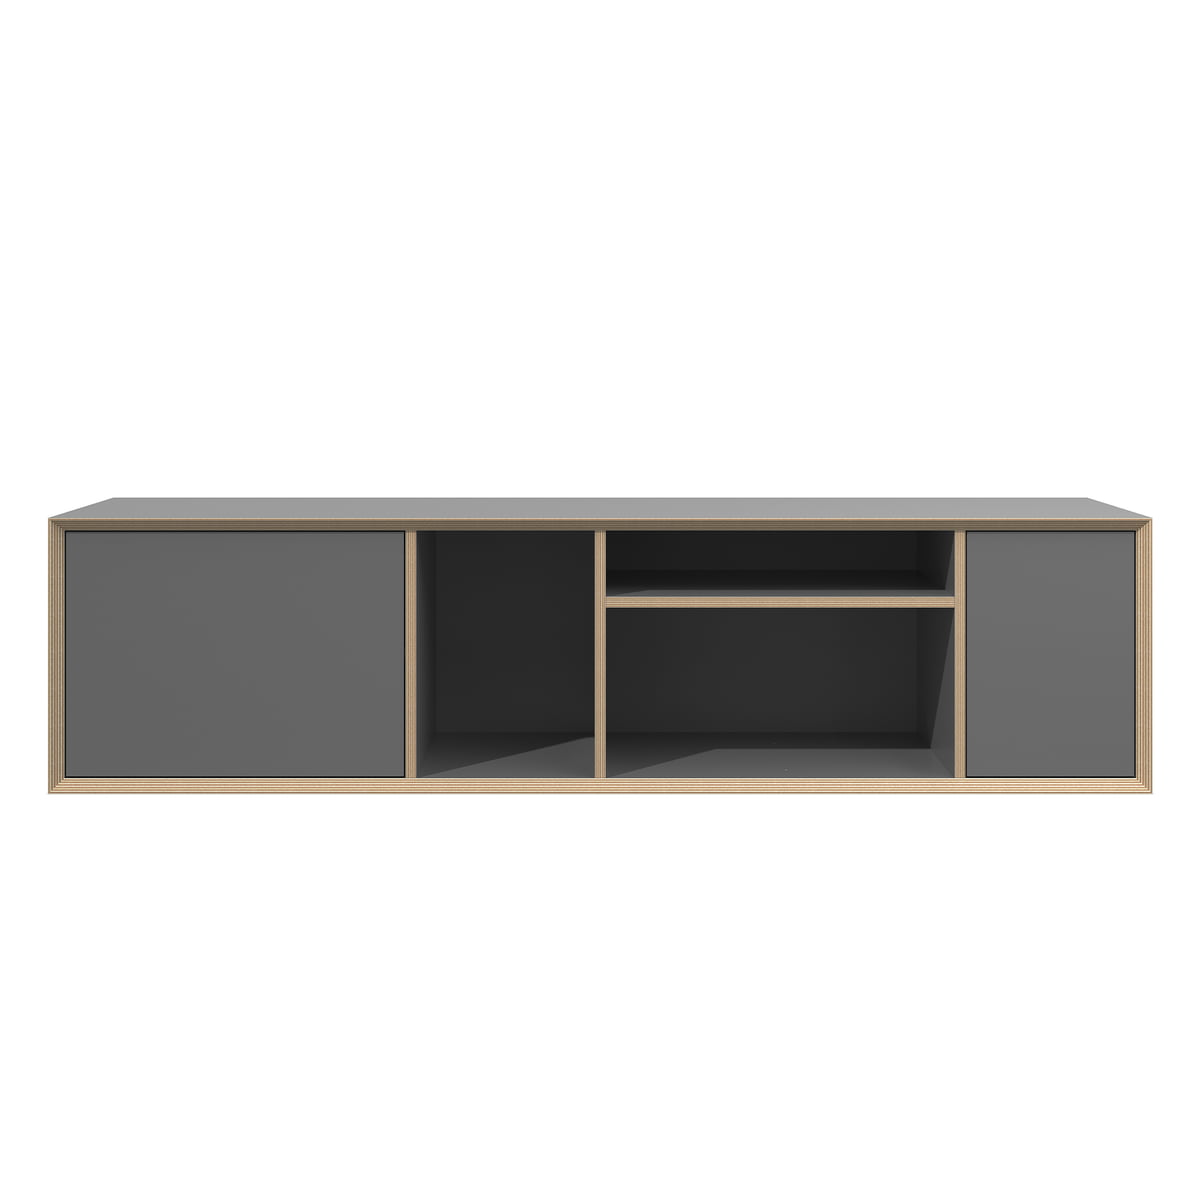 Müller Small Living - Vertiko Wide Sideboard | Connox